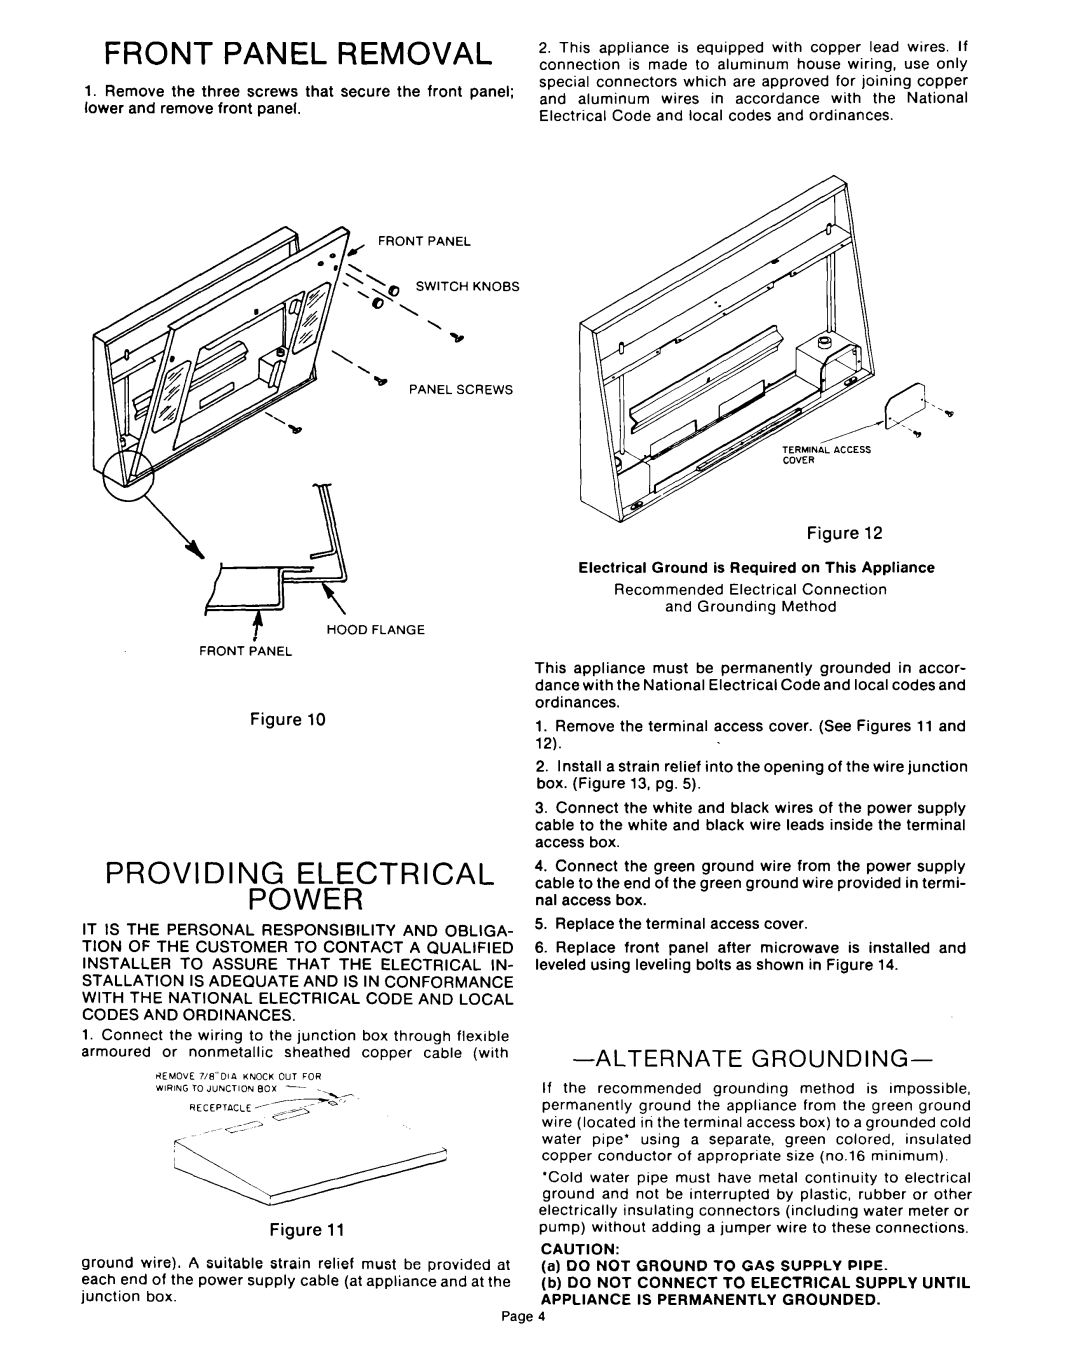 Whirlpool RCH3660 instruction sheet Front Panel Removal, Alternate Grounding, Providing Electrical Power, Front Anel 